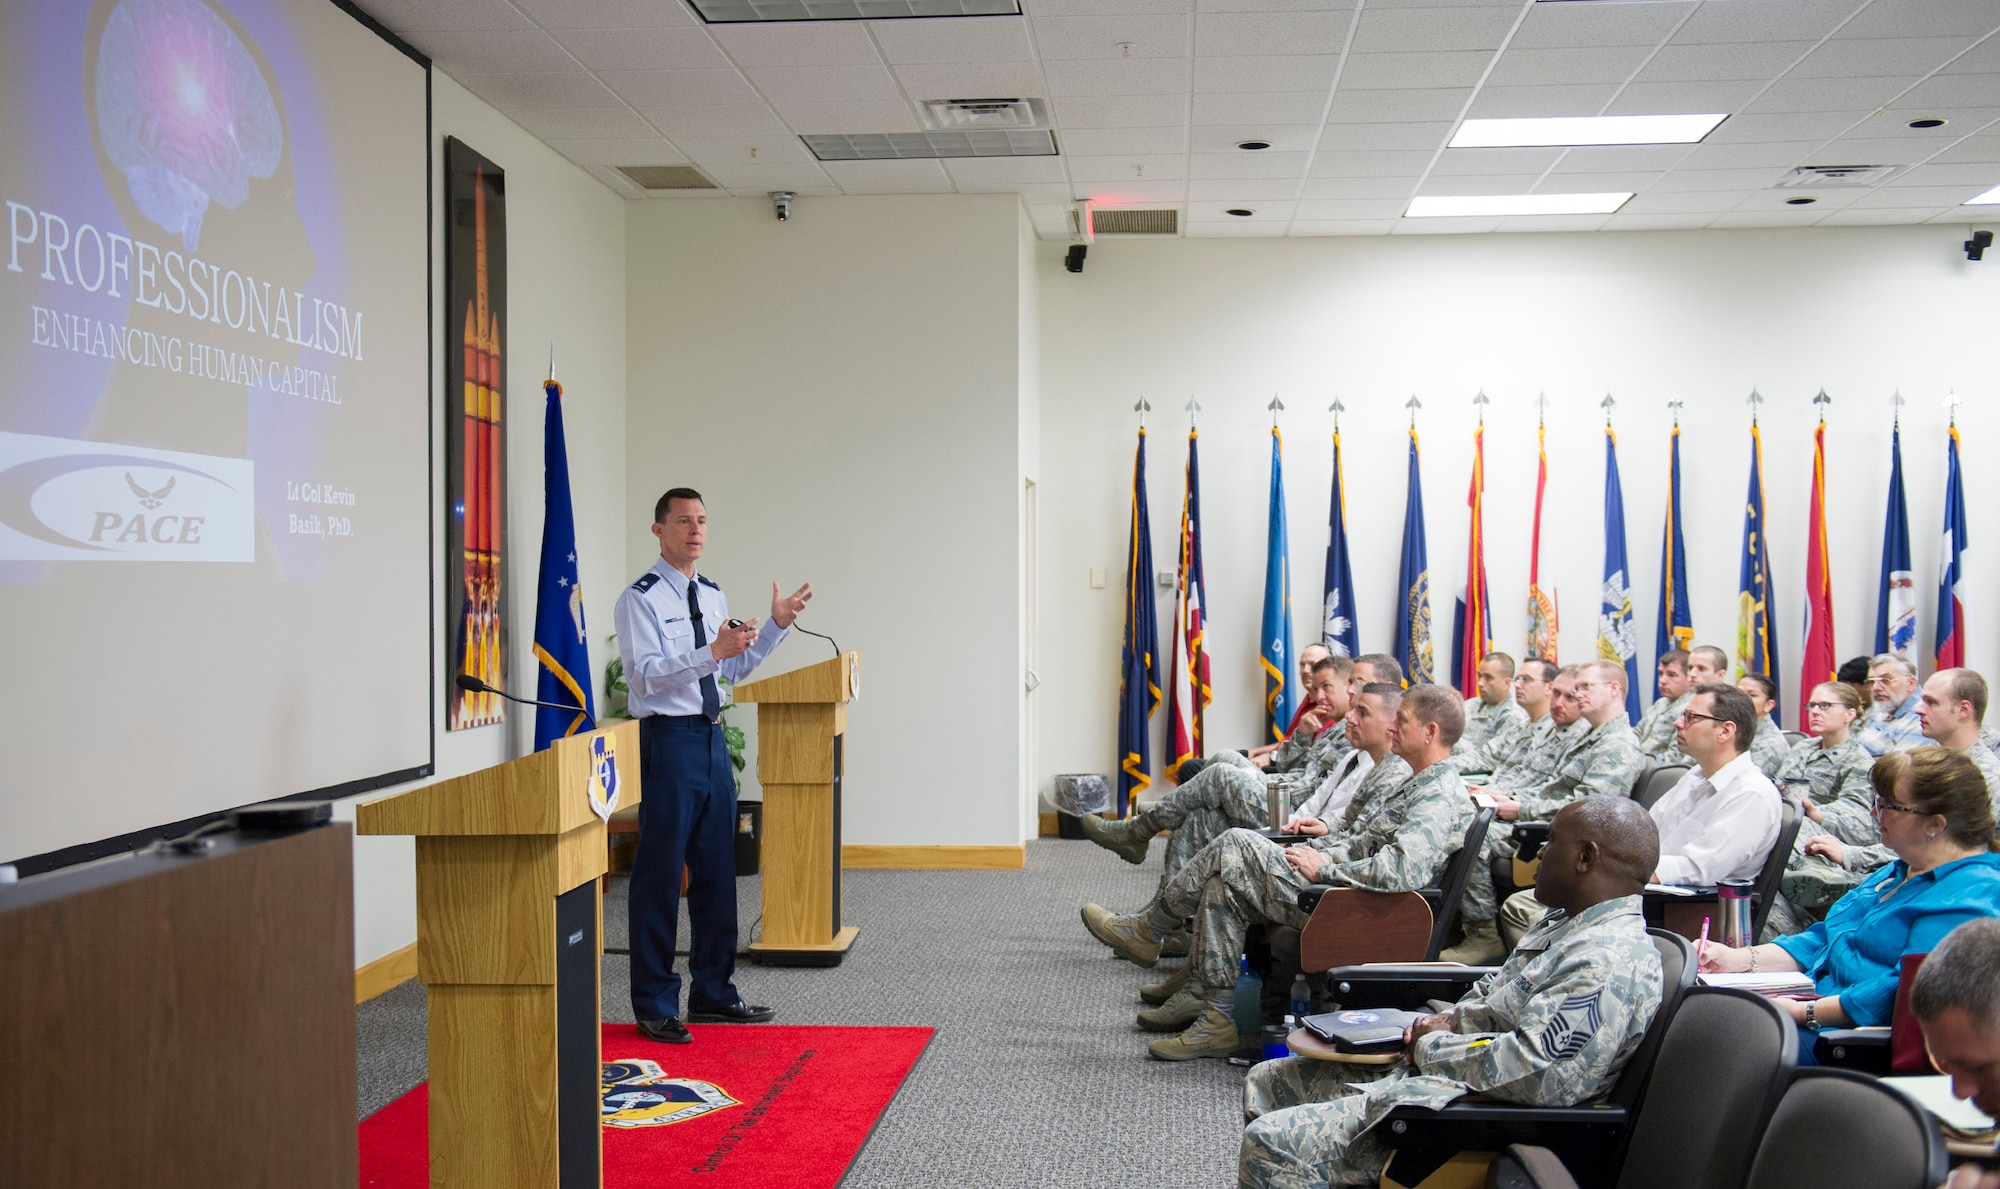 Lt. Col. Kevin Basik, PhD, the U.S. Air Force representative to the office of the Senior Advisor to the Secretary of Defense for Military Professionalism, spoke to the 45th Space Wing about Professionalism, Enhancing Human Capital April 26, 2016 at the Patrick Air Force Base Professional Development Center, Fla. The course provided an initiative in-depth discussion at the deliberate path for the development and determination of future leaders. (U.S. Air Force photos/Matthew Jurgens) (Released) 
